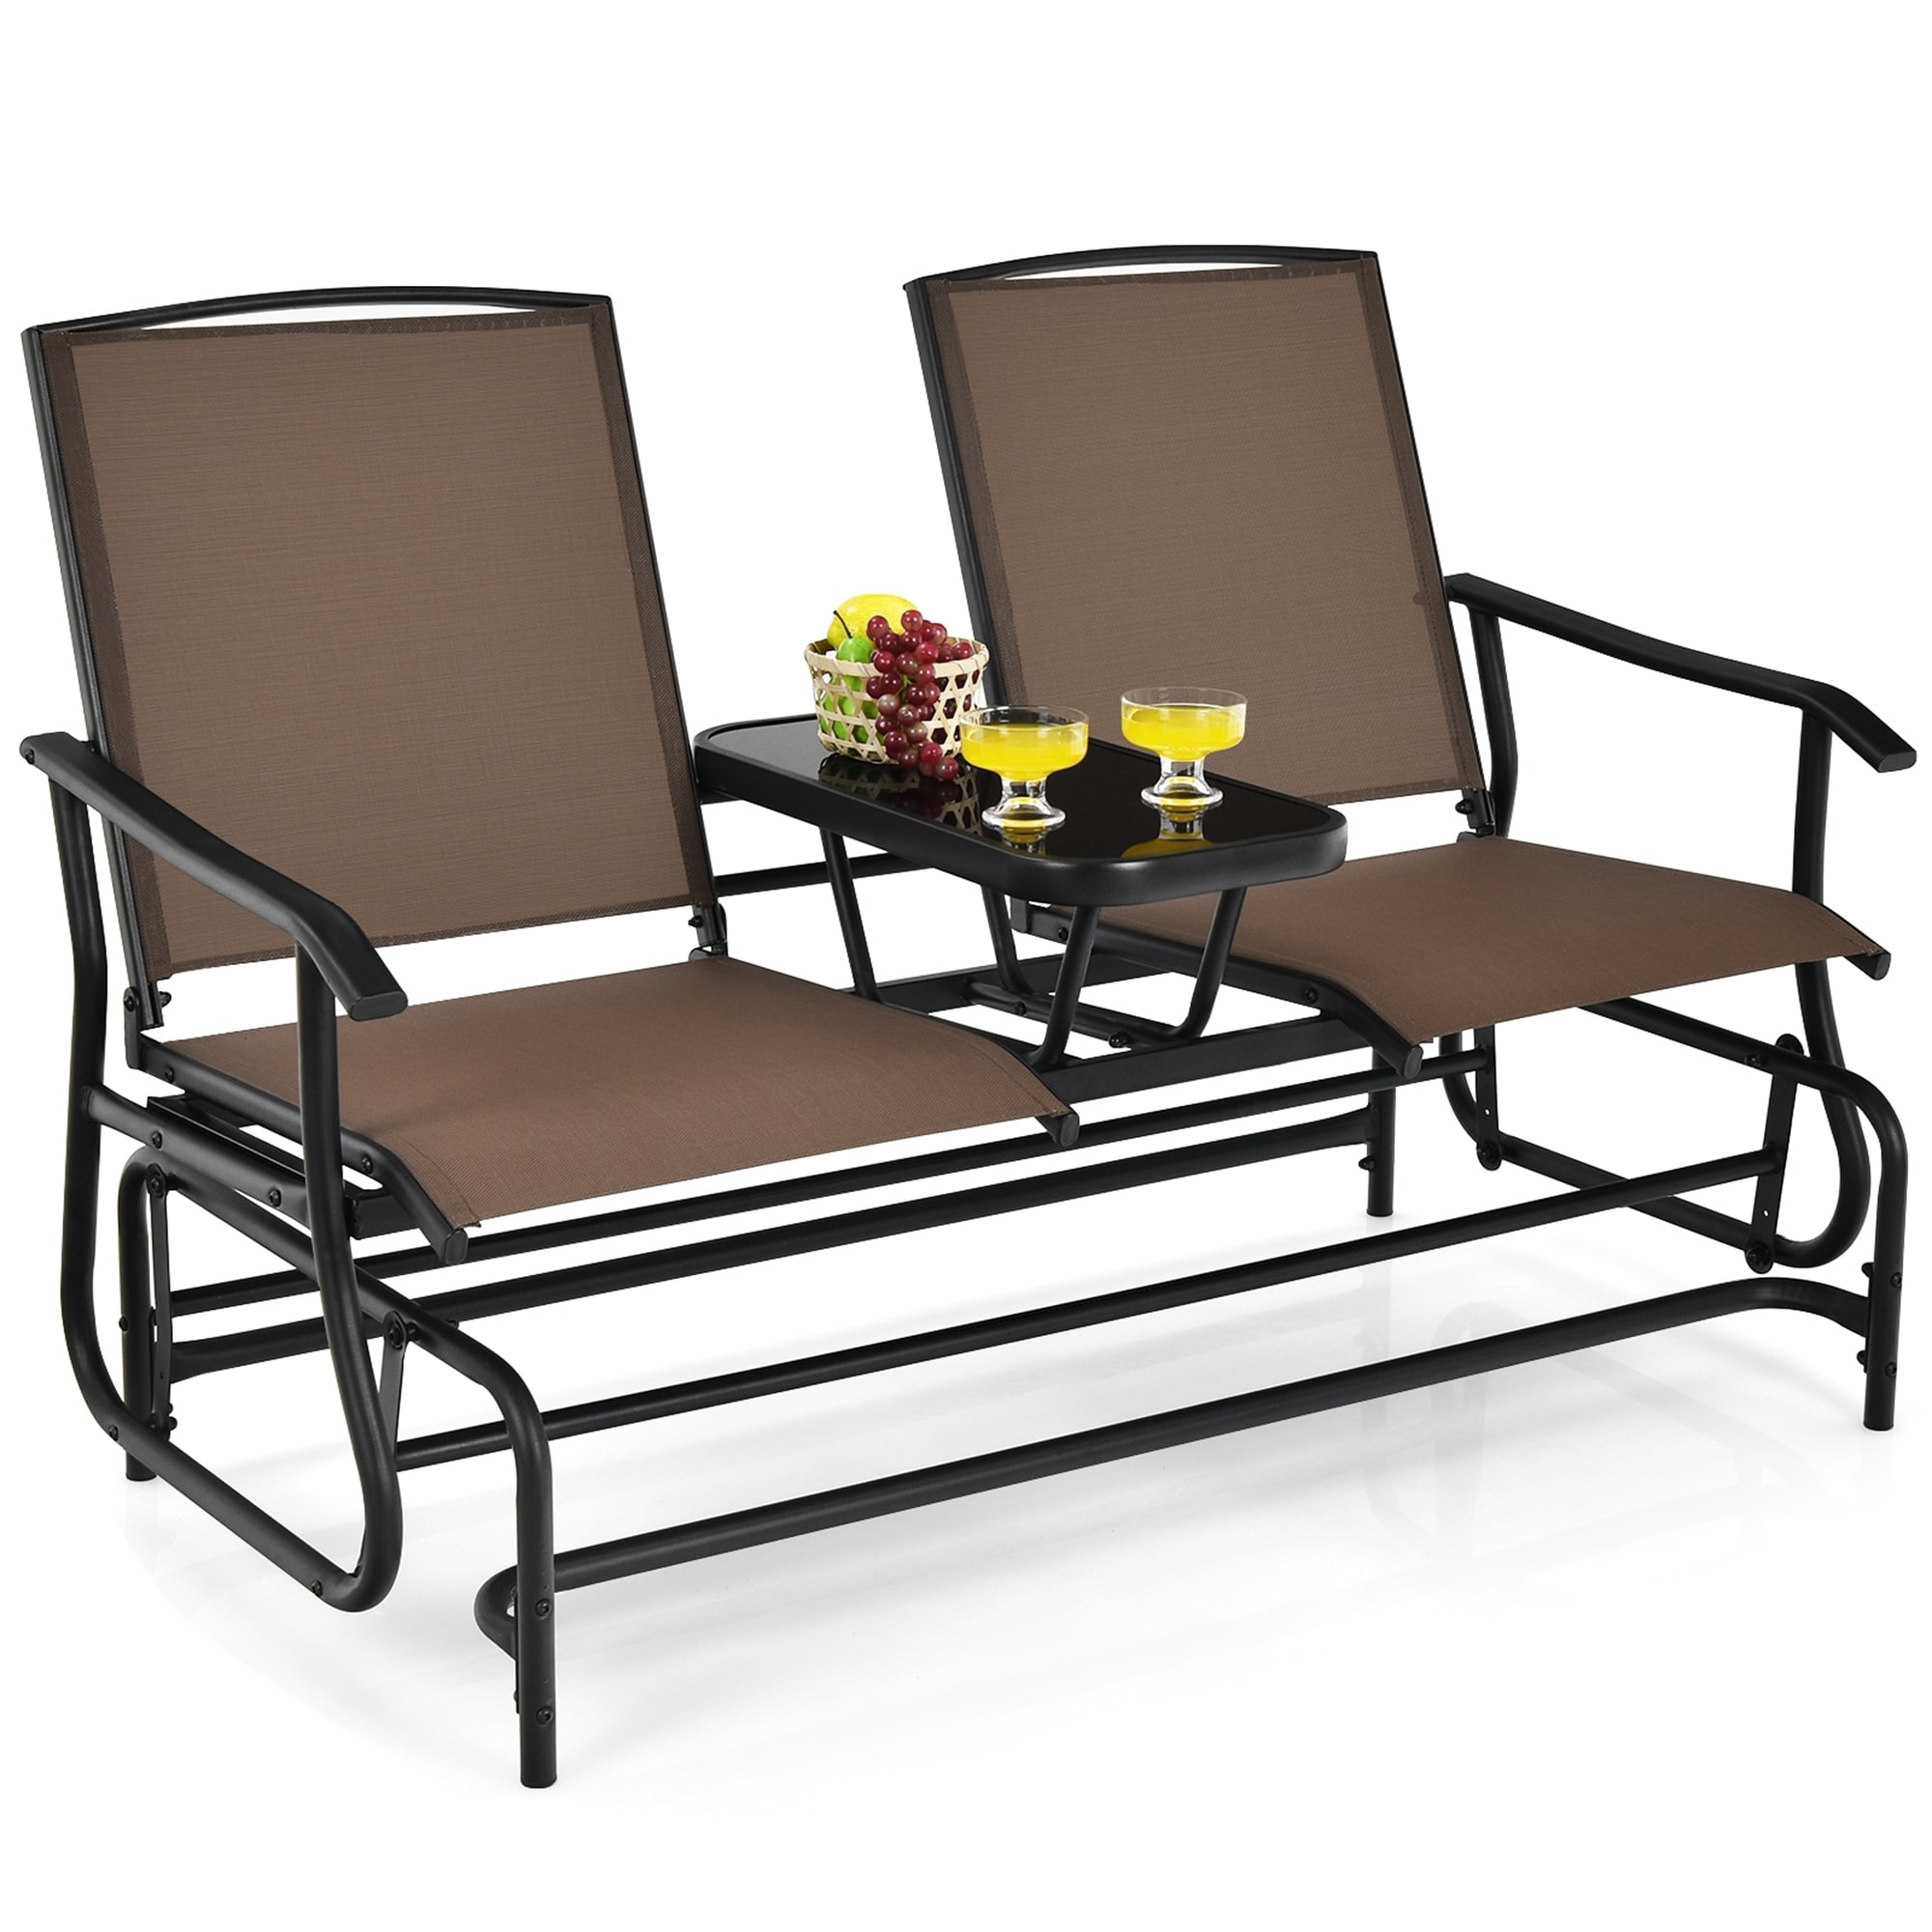 2-person Double Rocking Loveseat With Center Tempered Glass Table